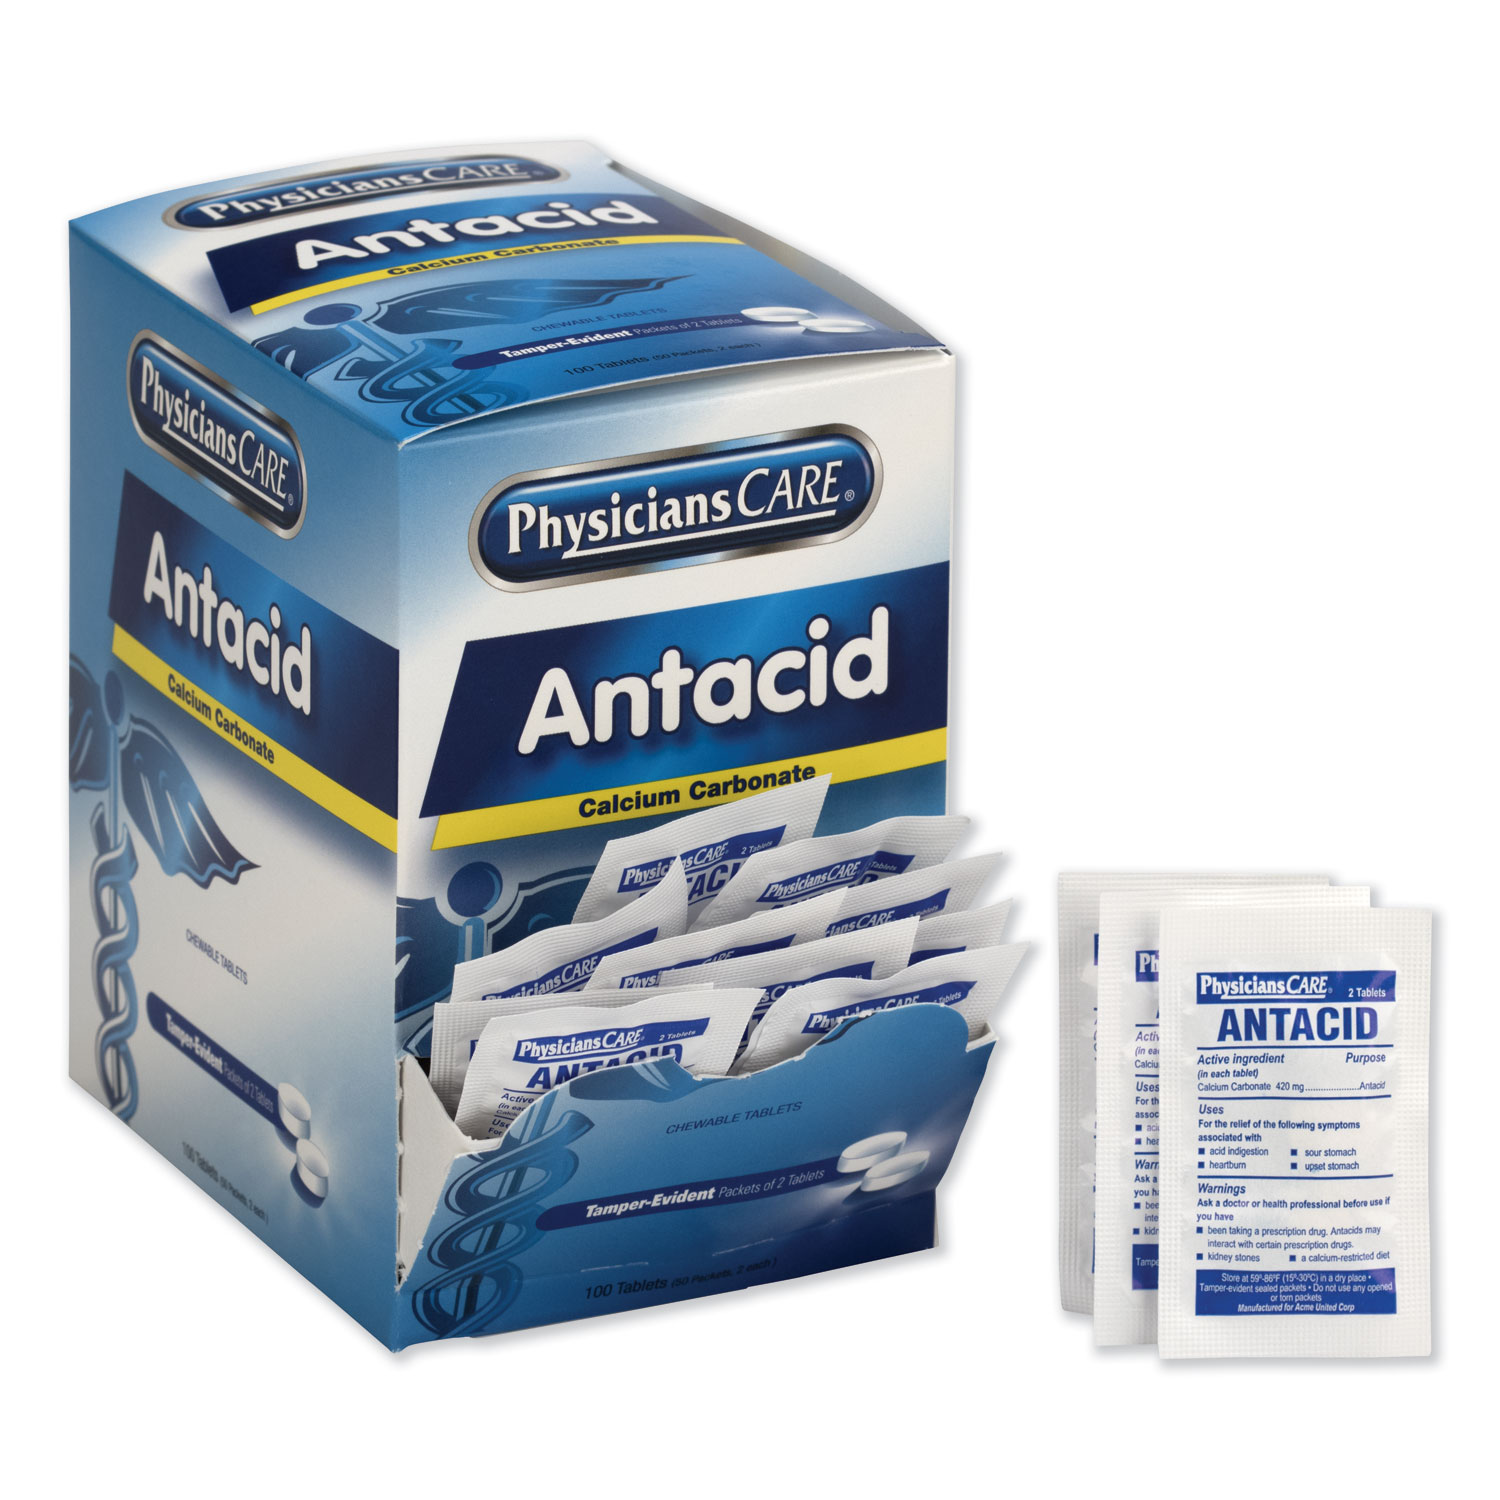  PhysiciansCare 90089 Antacid Calcium Carbonate Medication, Two-Pack, 50 Packs/Box (ACM90089) 